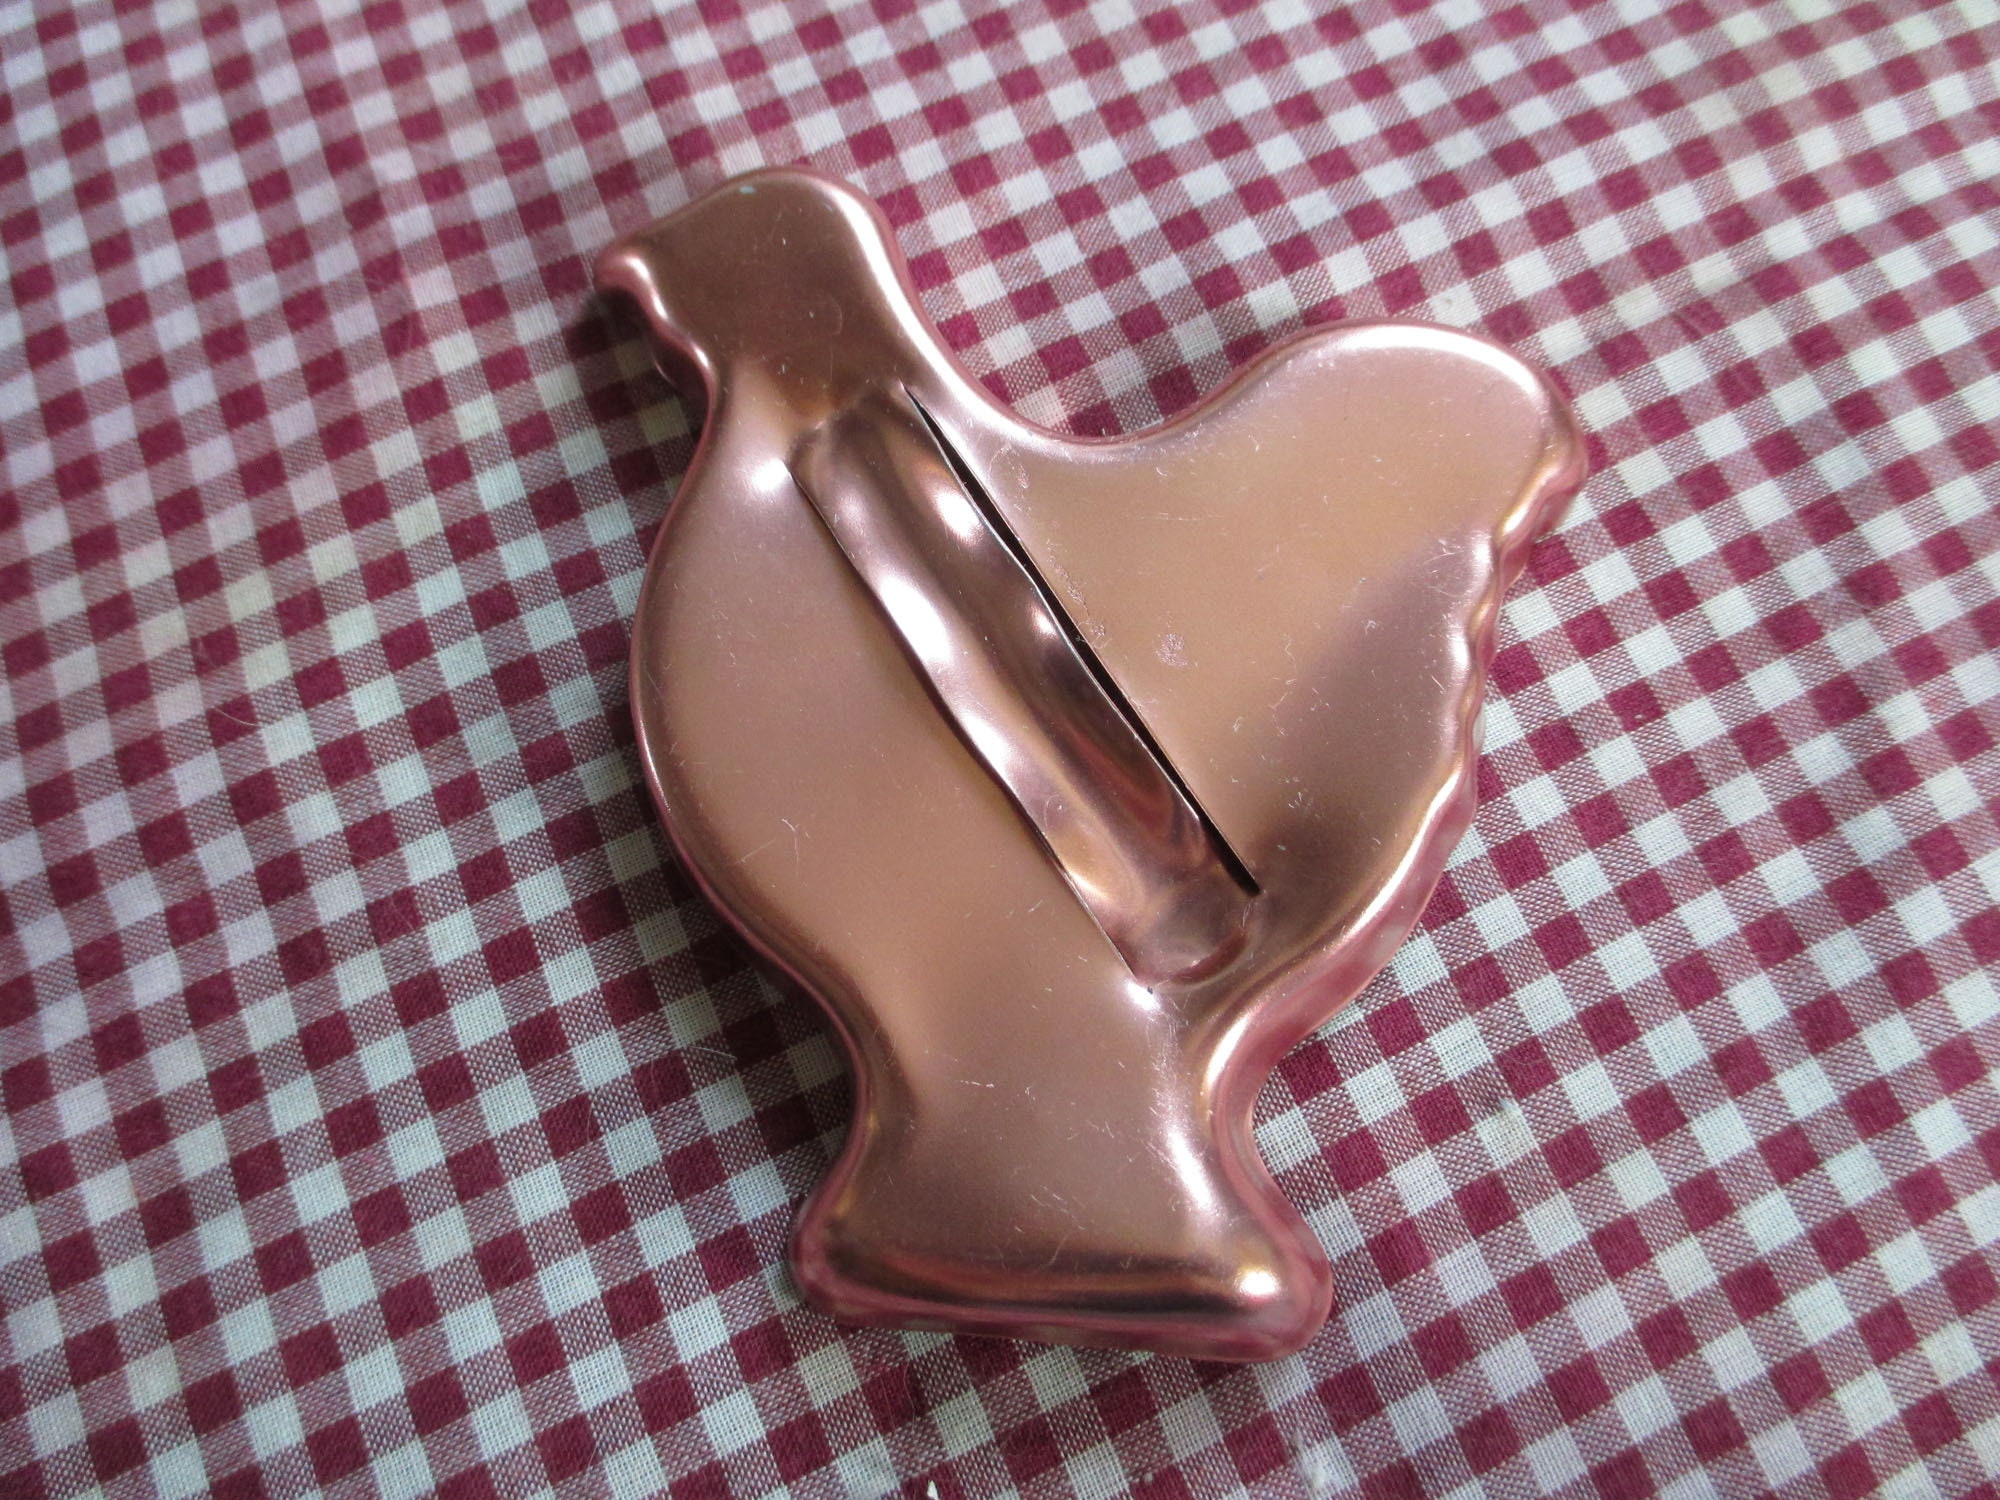 Vintage Tin - Copper Chicken Cookie Cutter One Of Hundreds From Cutter Estate Estate Find